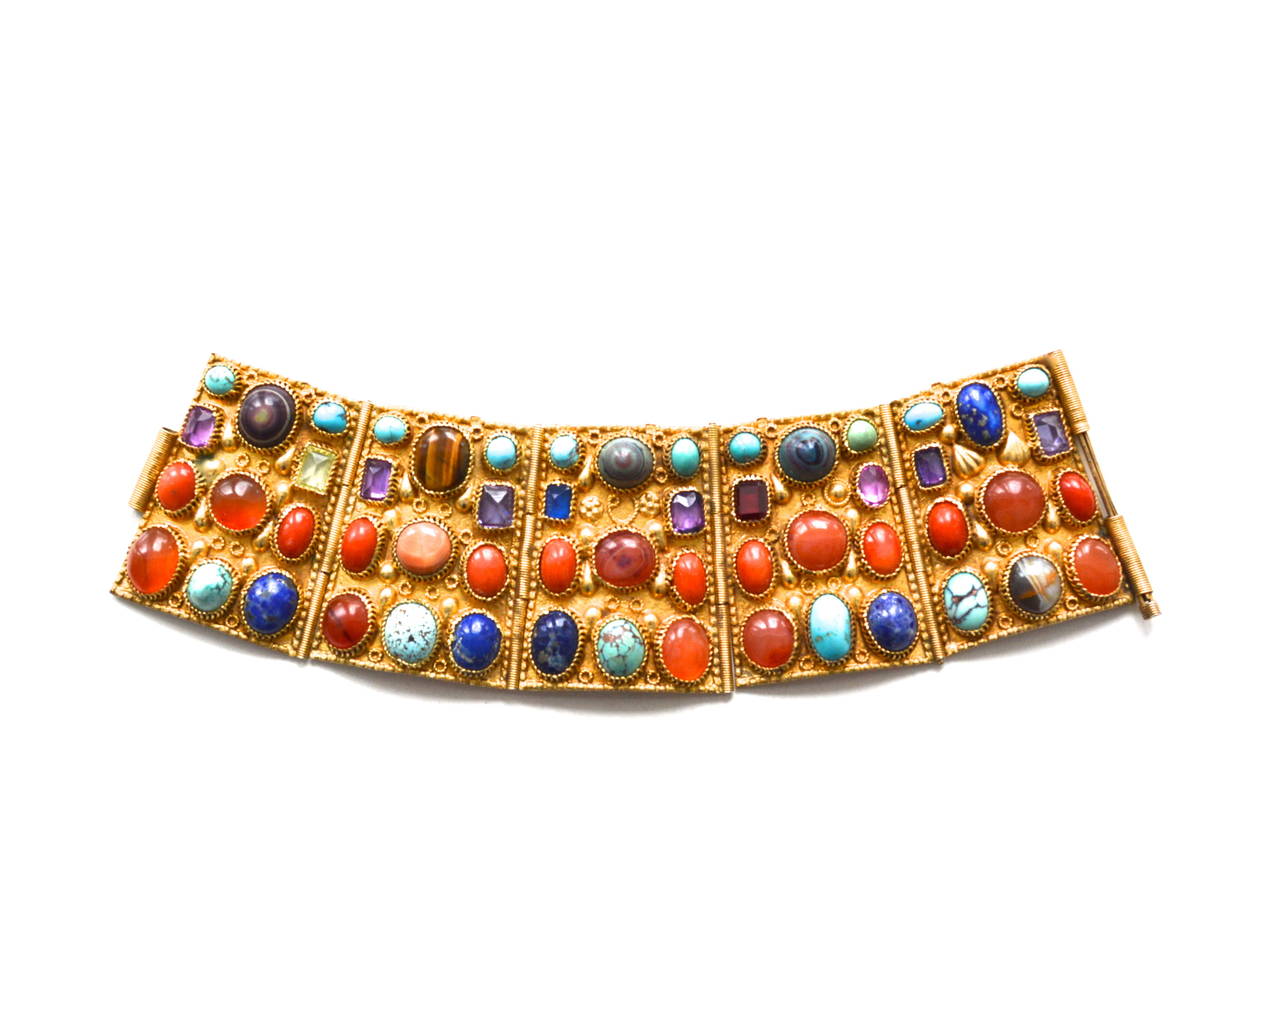 Stunning precious multiple stone and vermeil (gold over sterling silver) Etruscan style cuff. Unsigned. Circa 1960s. I believe the piece is Italian or of Persian origin. Features lapis, amythest, crystal, turquoise, agate, and coral. Beautiful rich